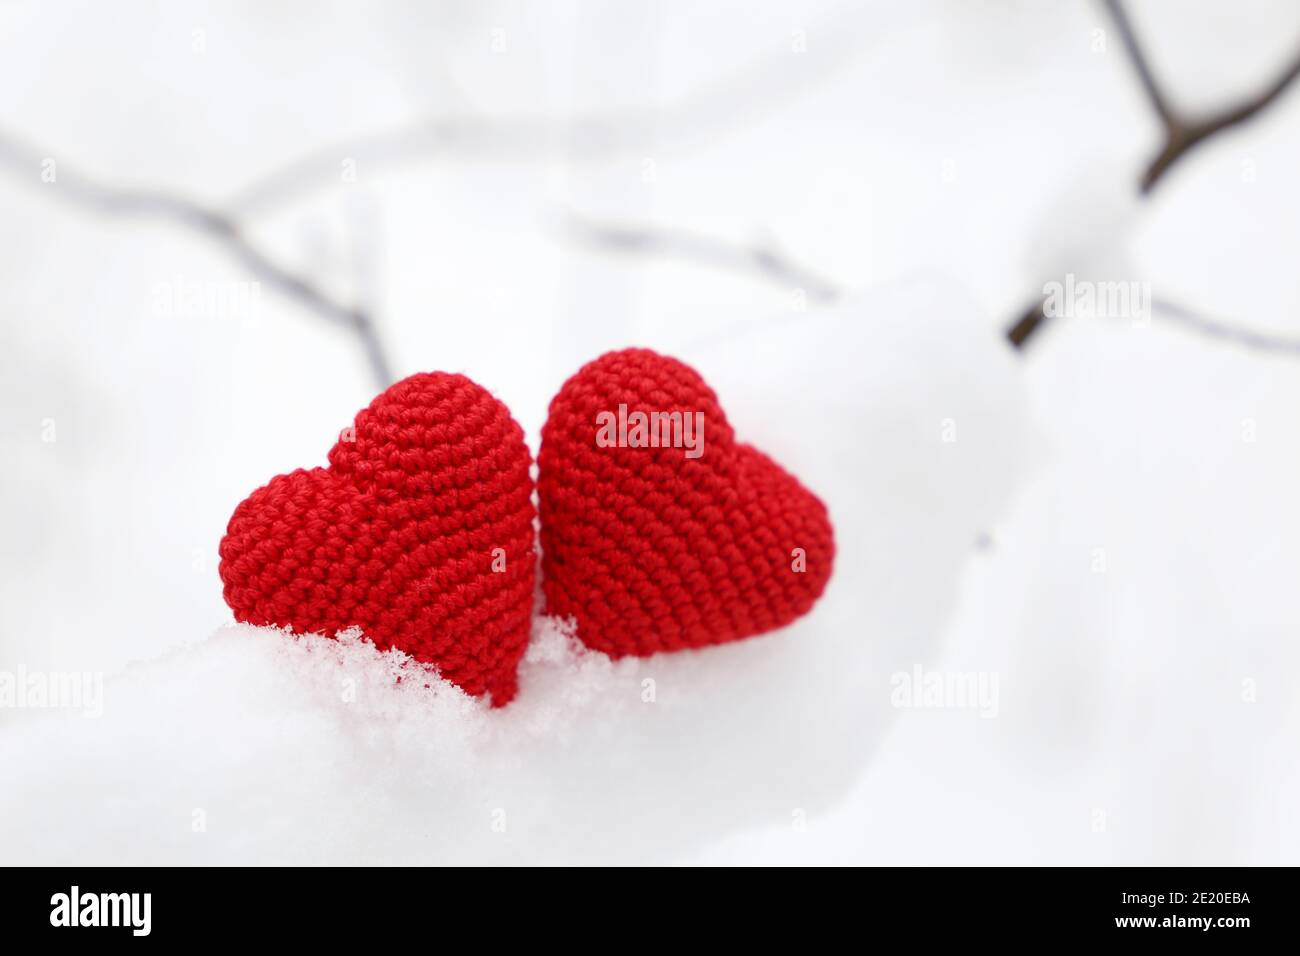 Valentine hearts in winter forest, cold weather. Two red knitted hearts on snow covered branch, symbol of romantic love, background for holiday Stock Photo